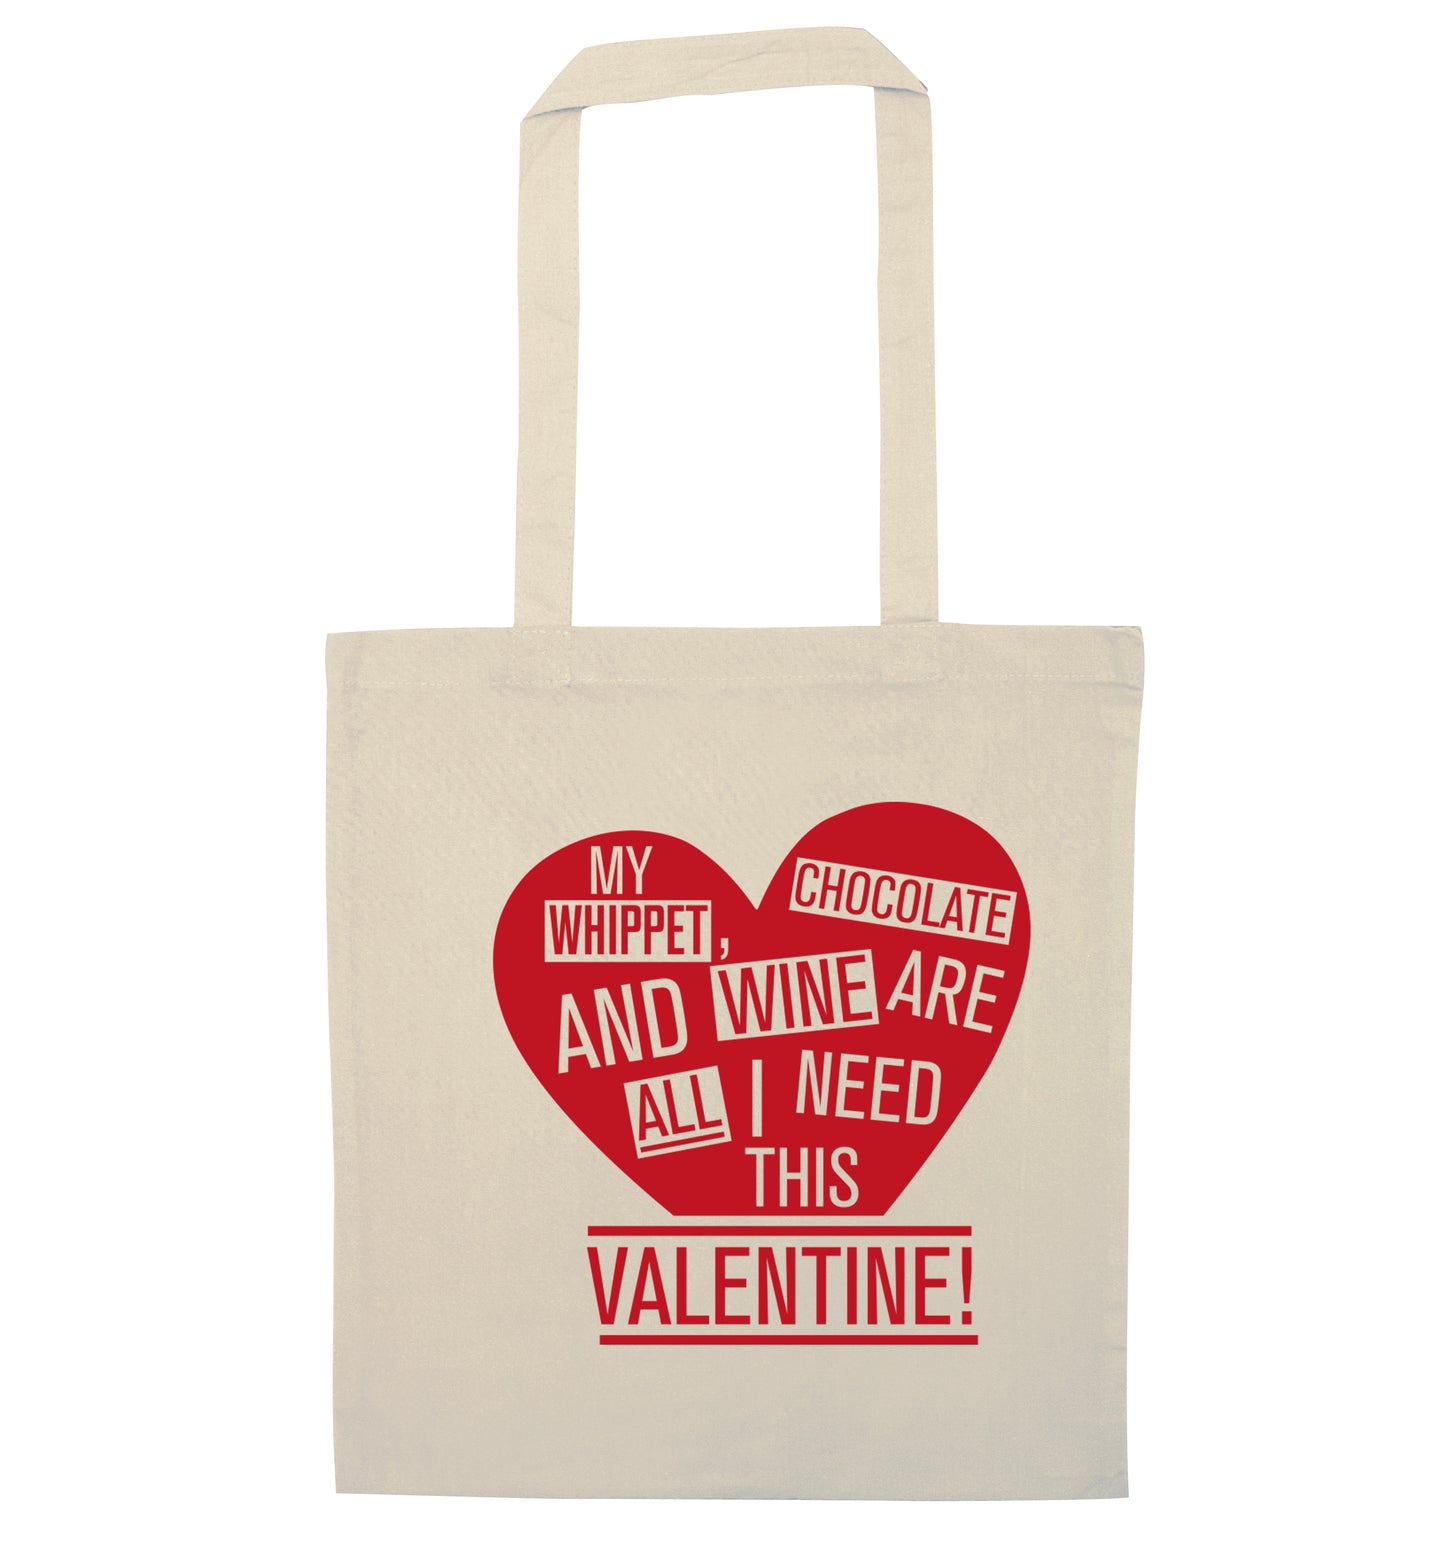 My whippet, chocolate and wine are all I need this valentine! natural tote bag